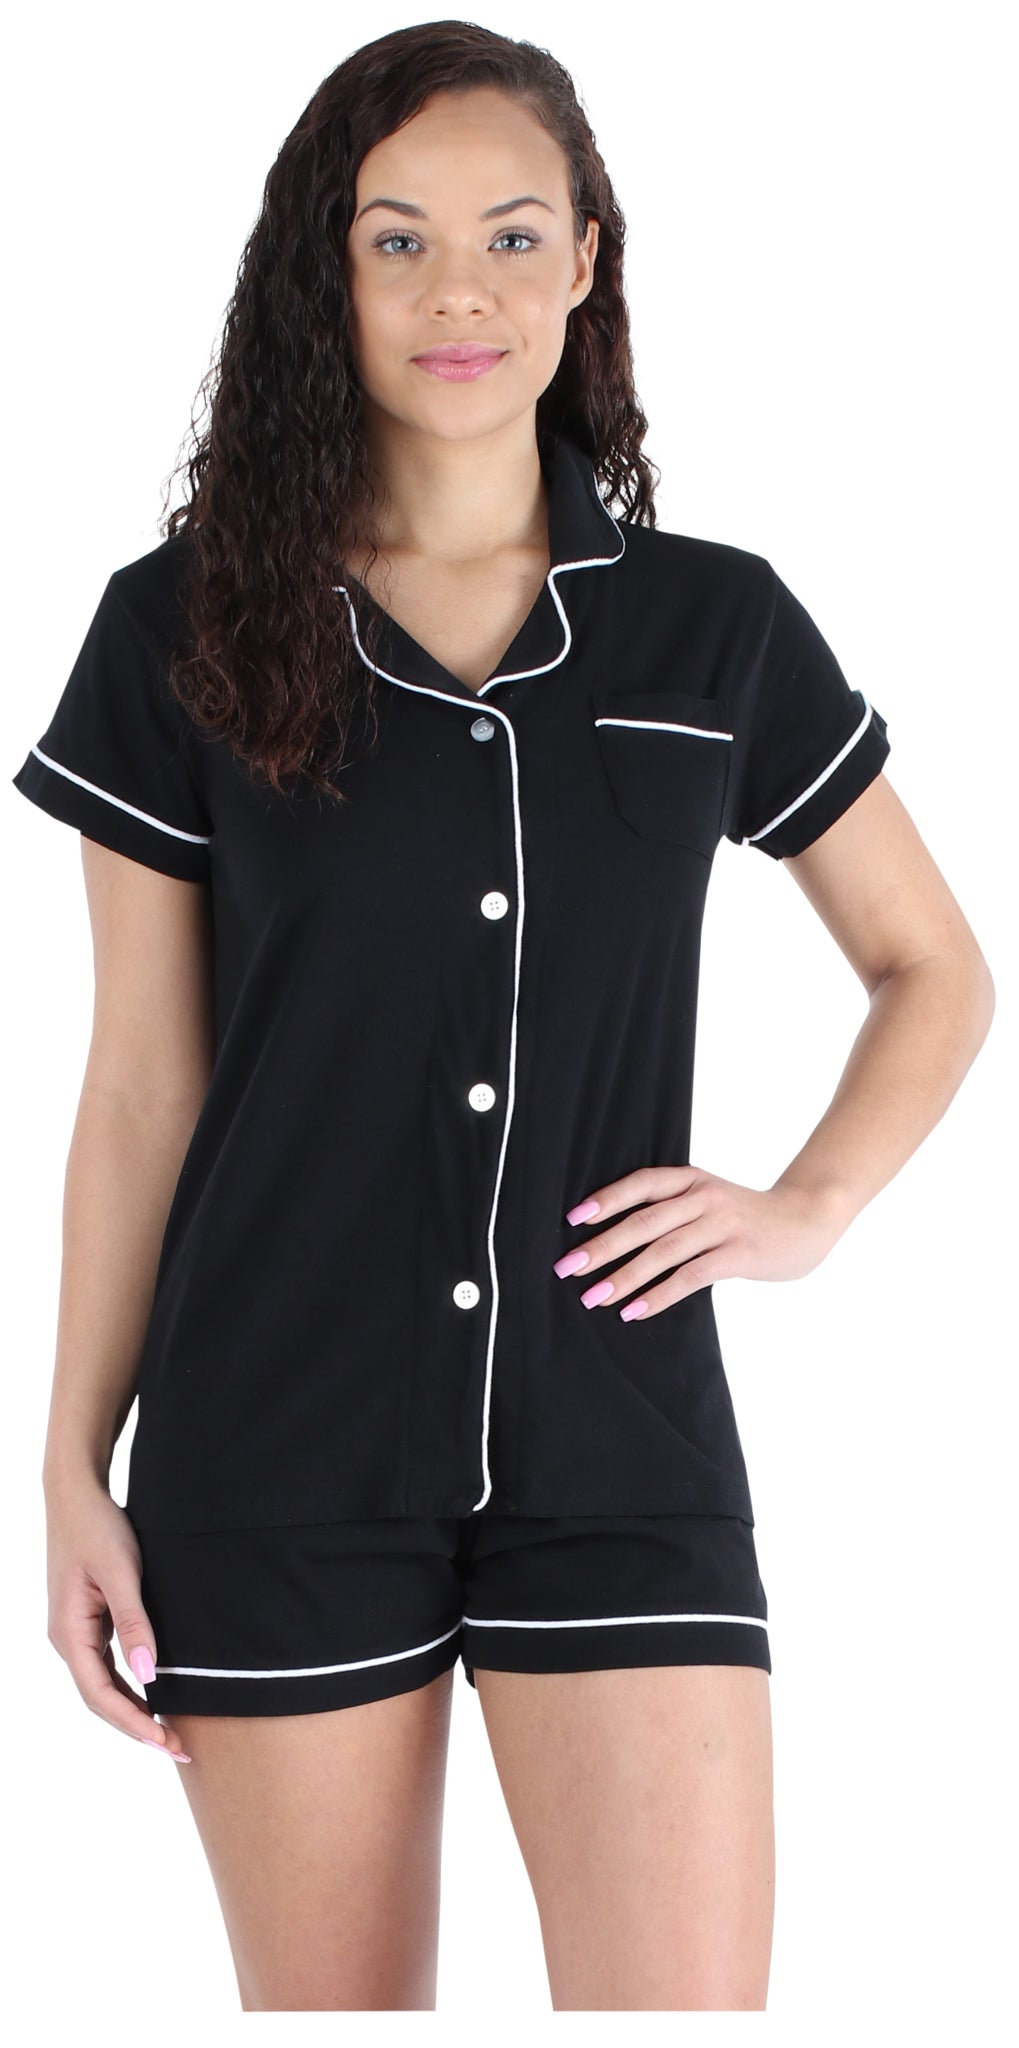 Women's Stretchy Jersey Button Up Top and Shorts Pajama Set